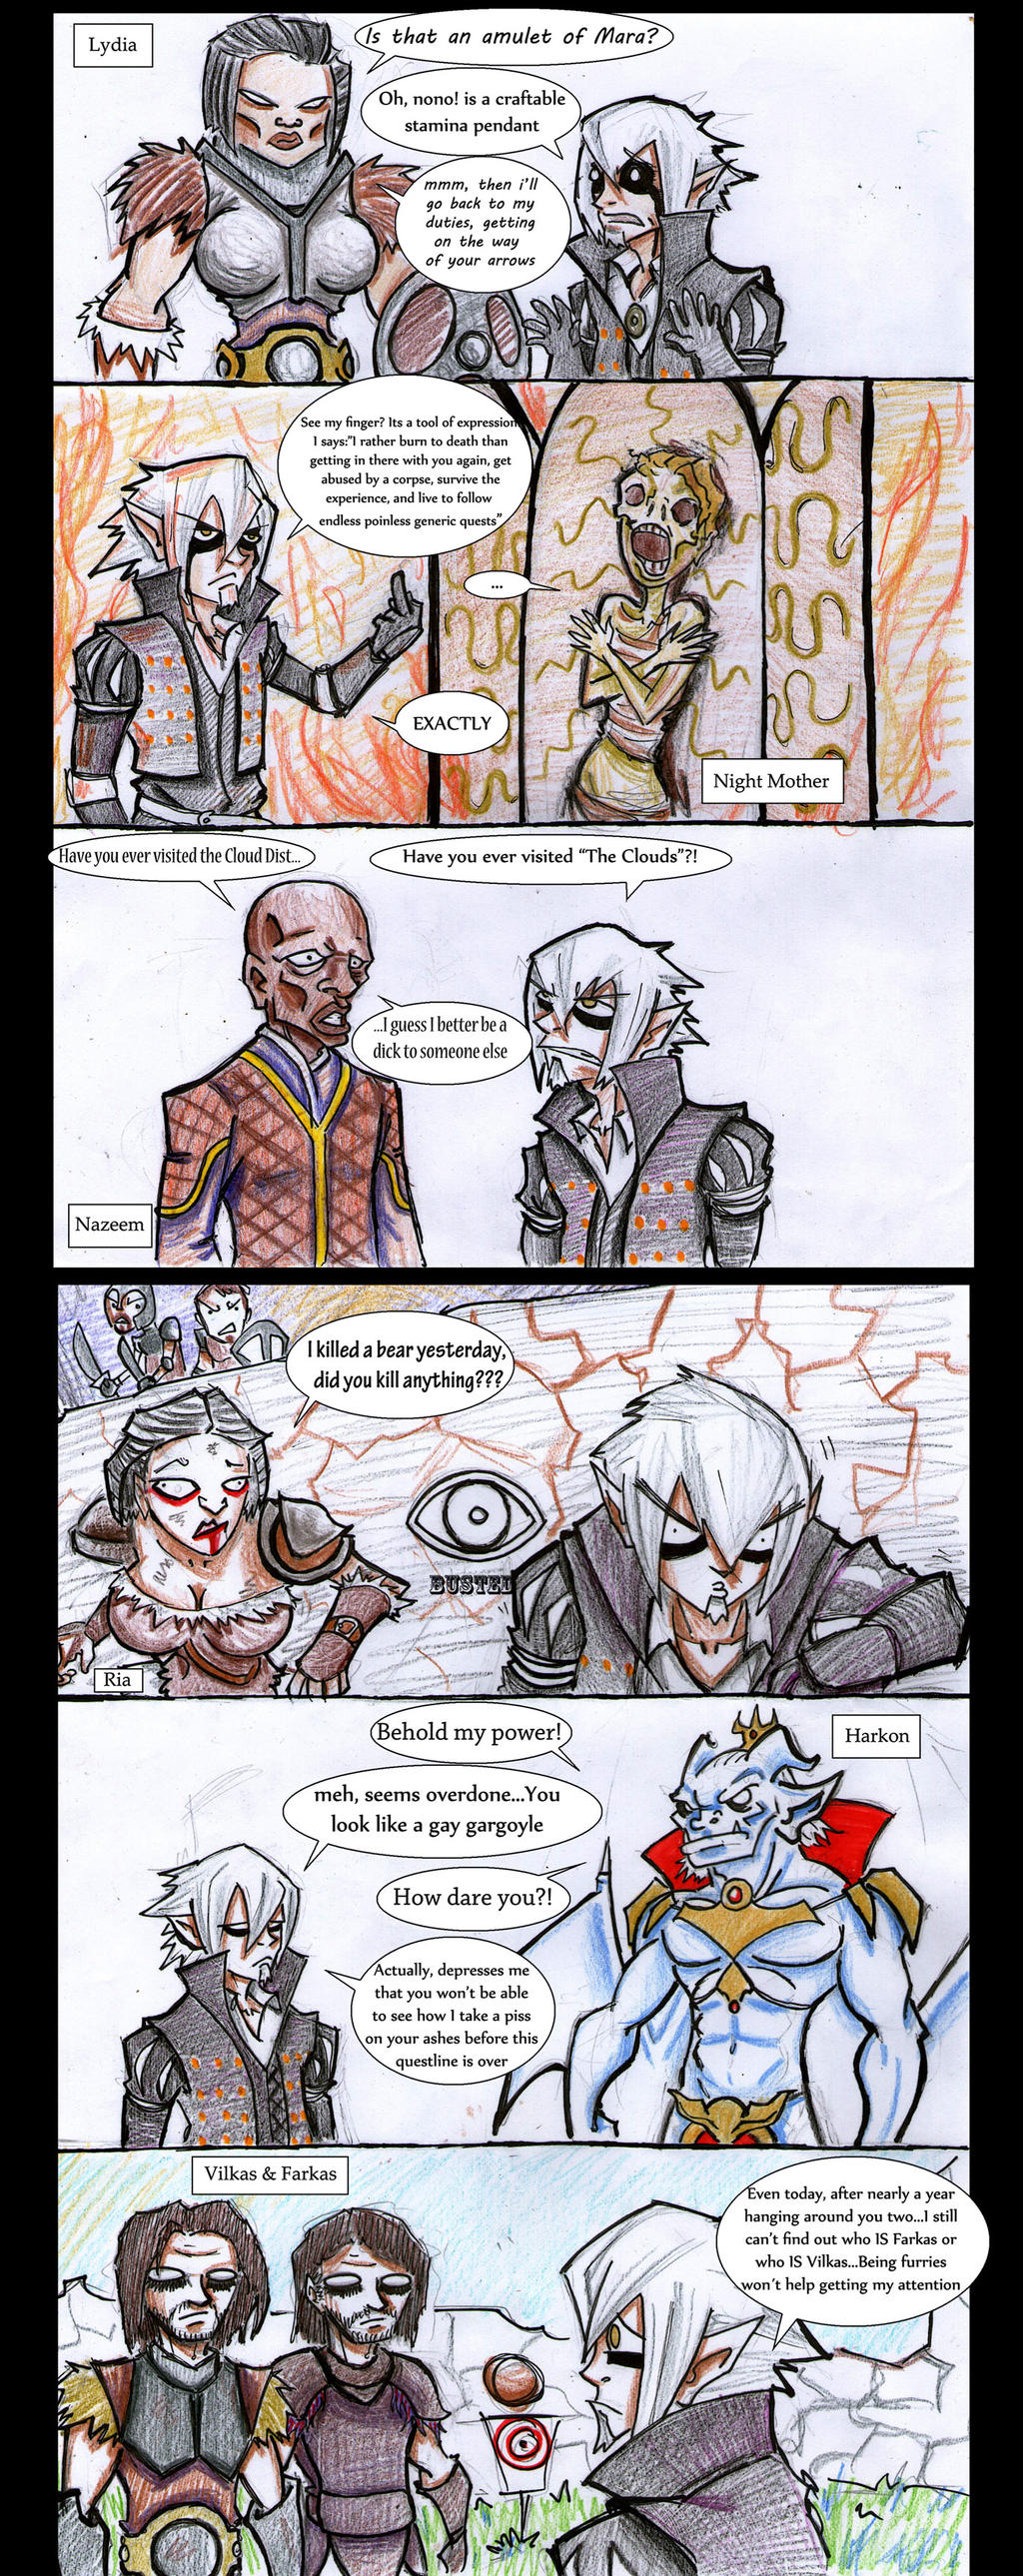 skyrim_most_annoying_characters_part_2_by_mailus-d5e9wb5.jpg